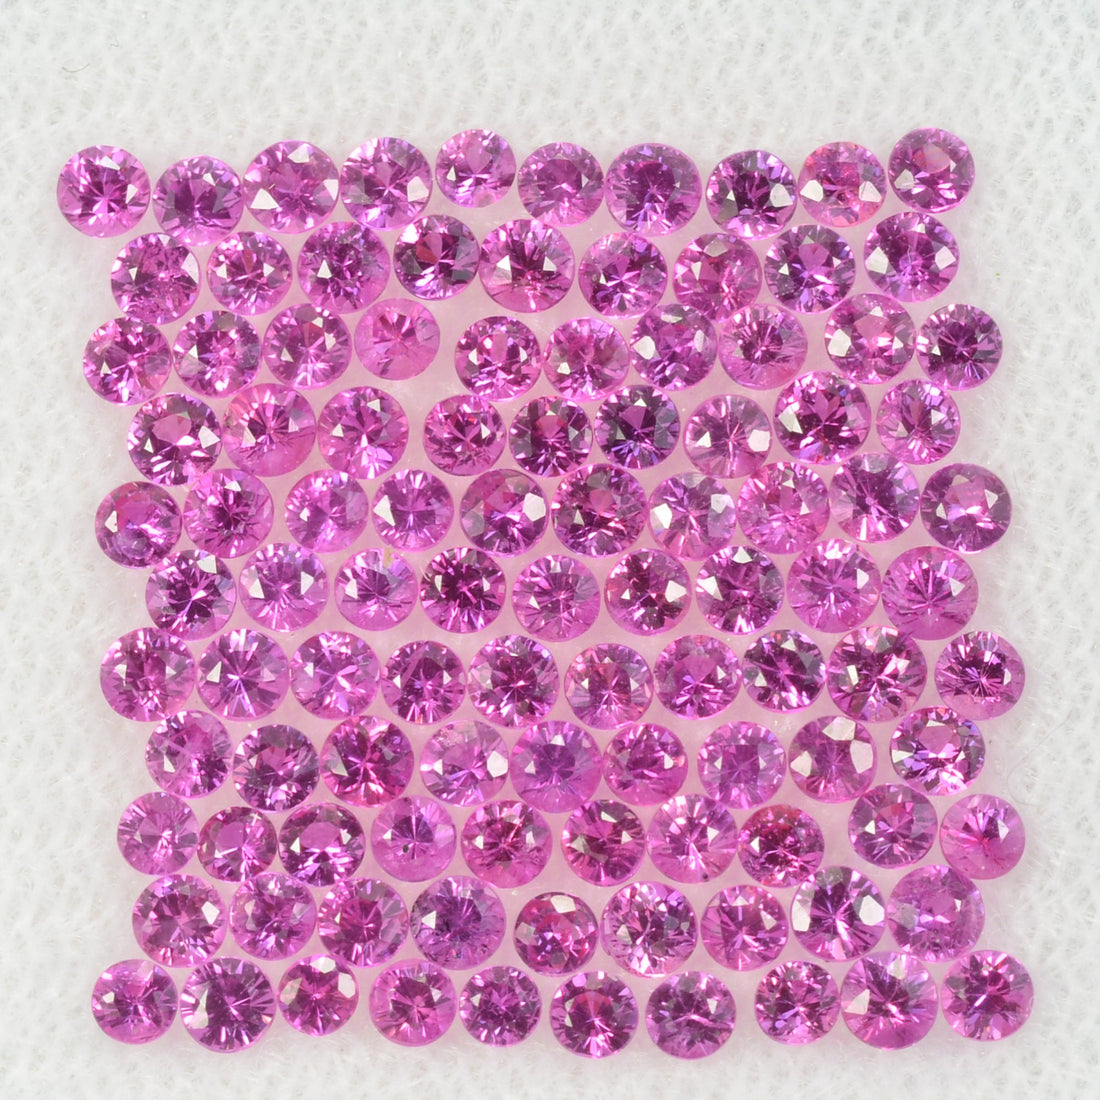 1.8-2.3 mm Natural Pink Sapphire Loose Gemstone Round Diamond Cut Vs Quality A+ Color